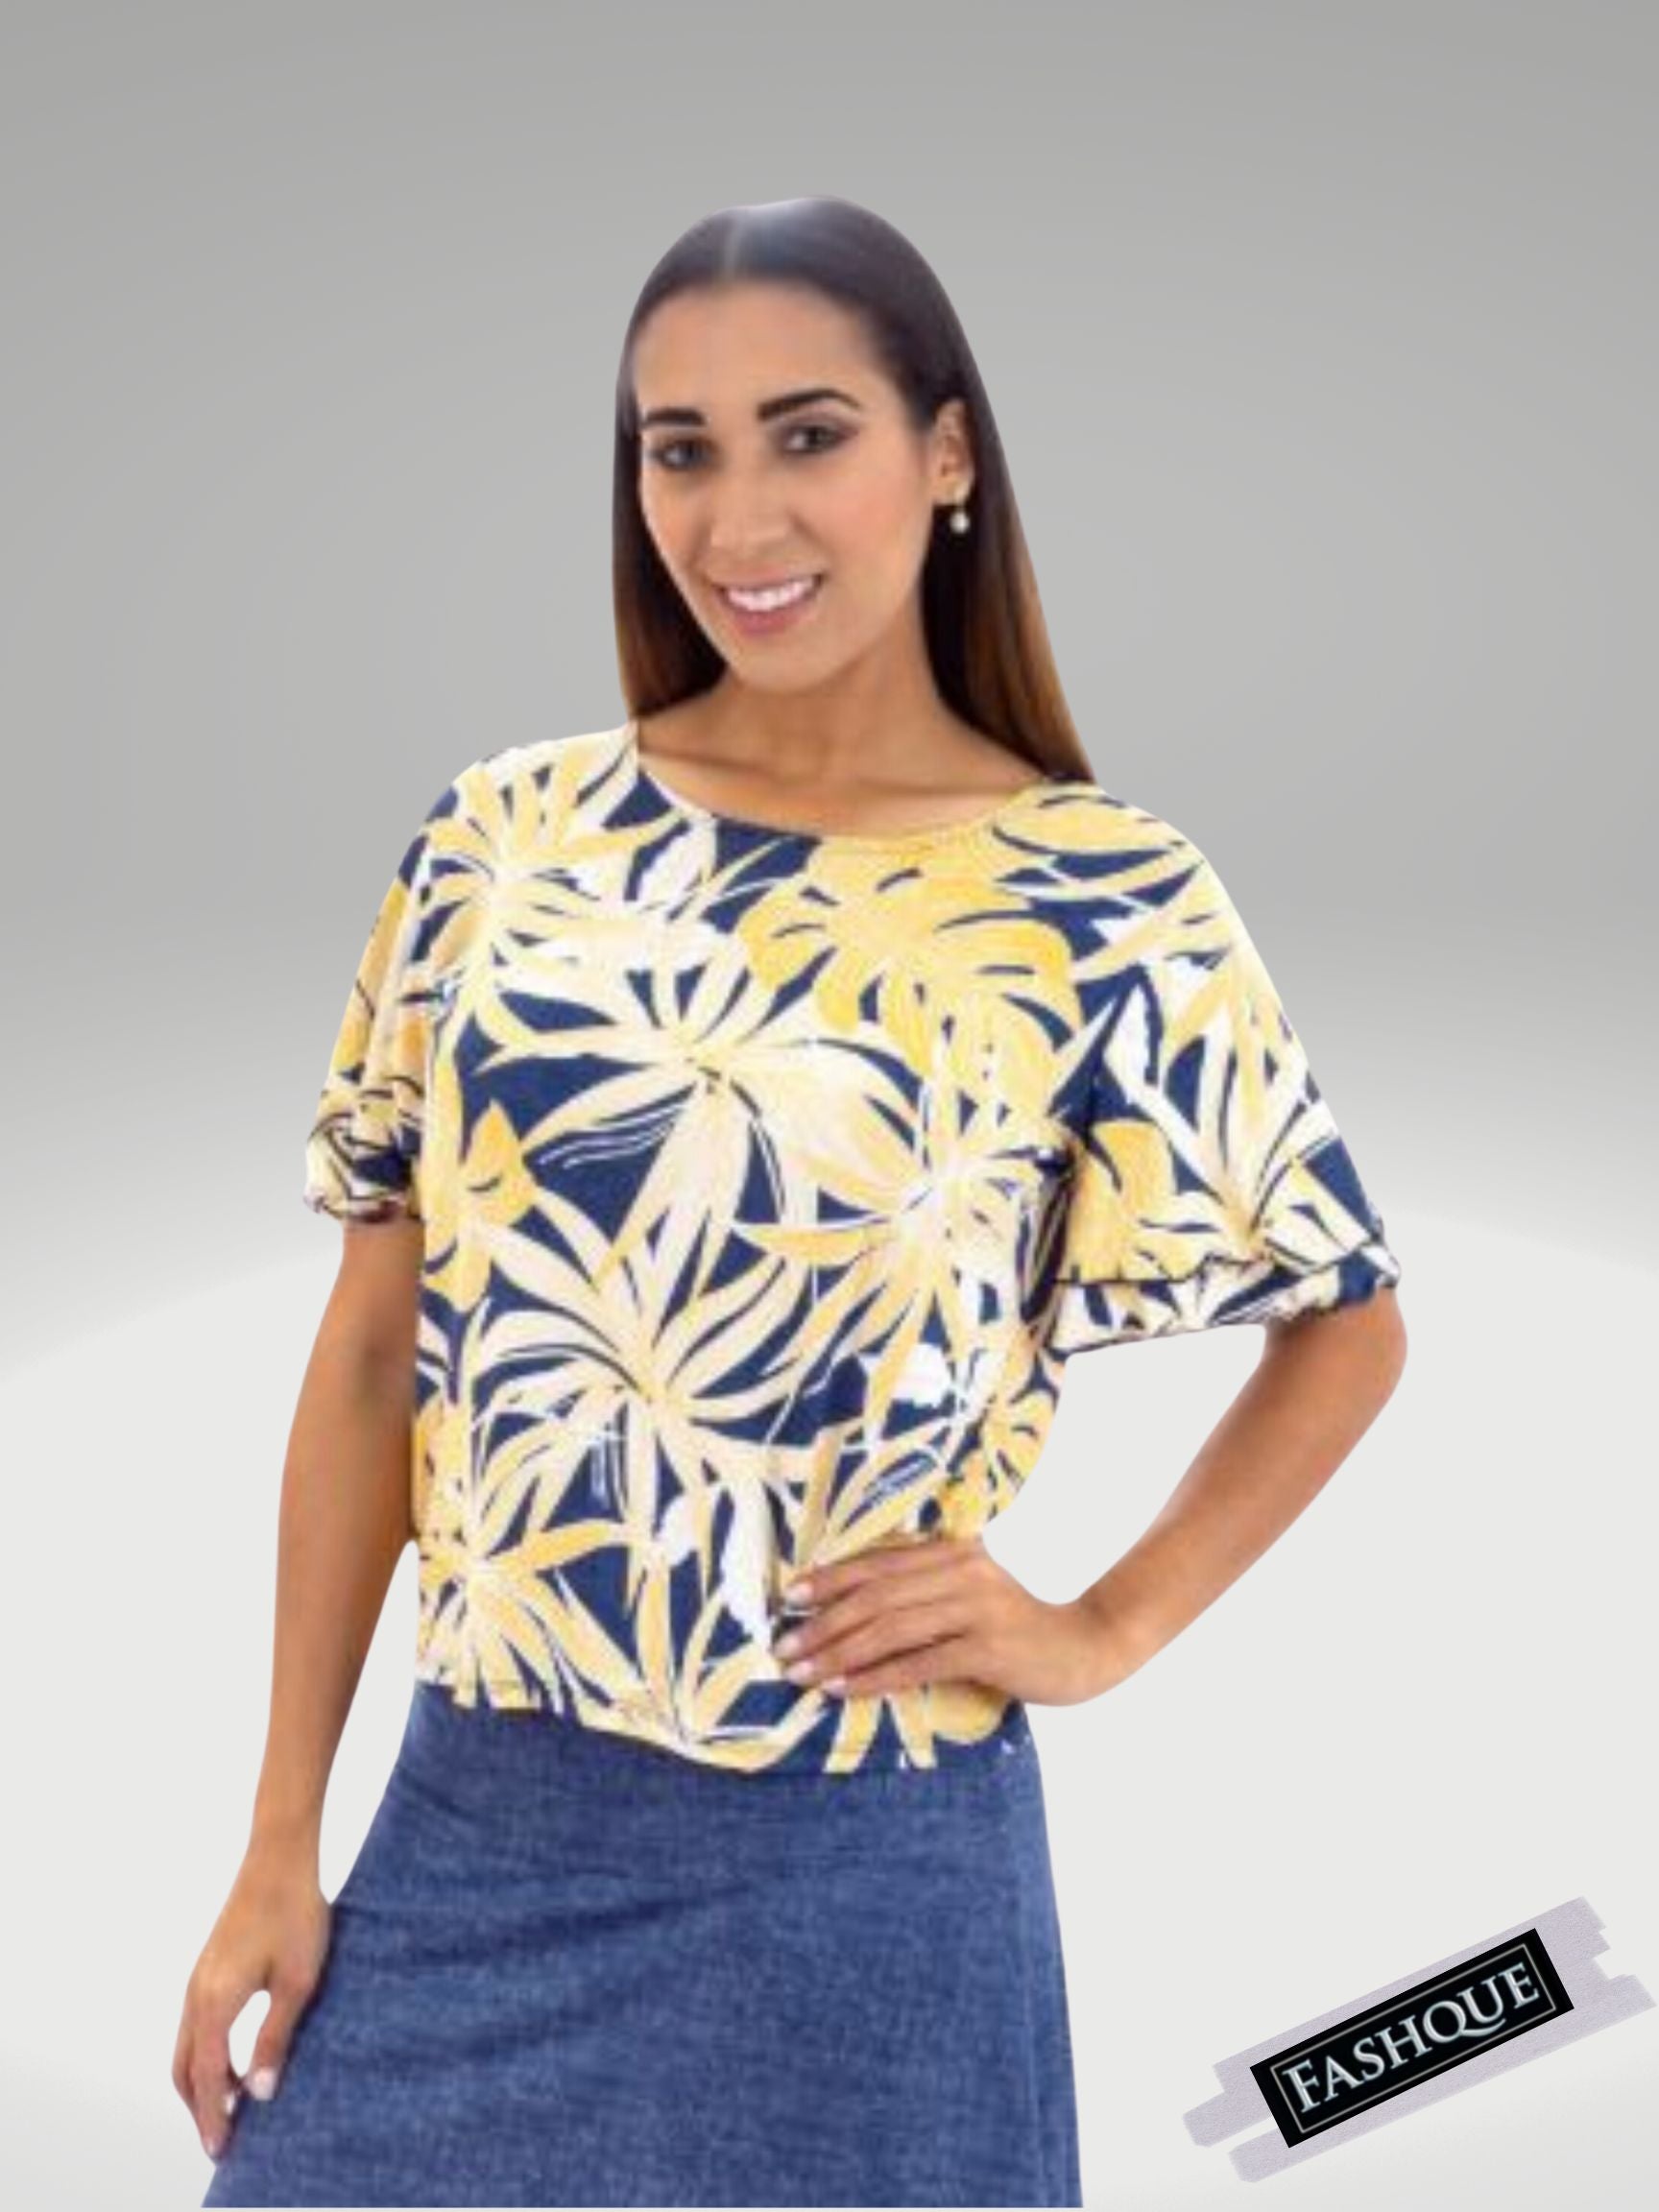 FASHQUE - Double Ruffle Bell Sleeves Scoop Neck Top - T560